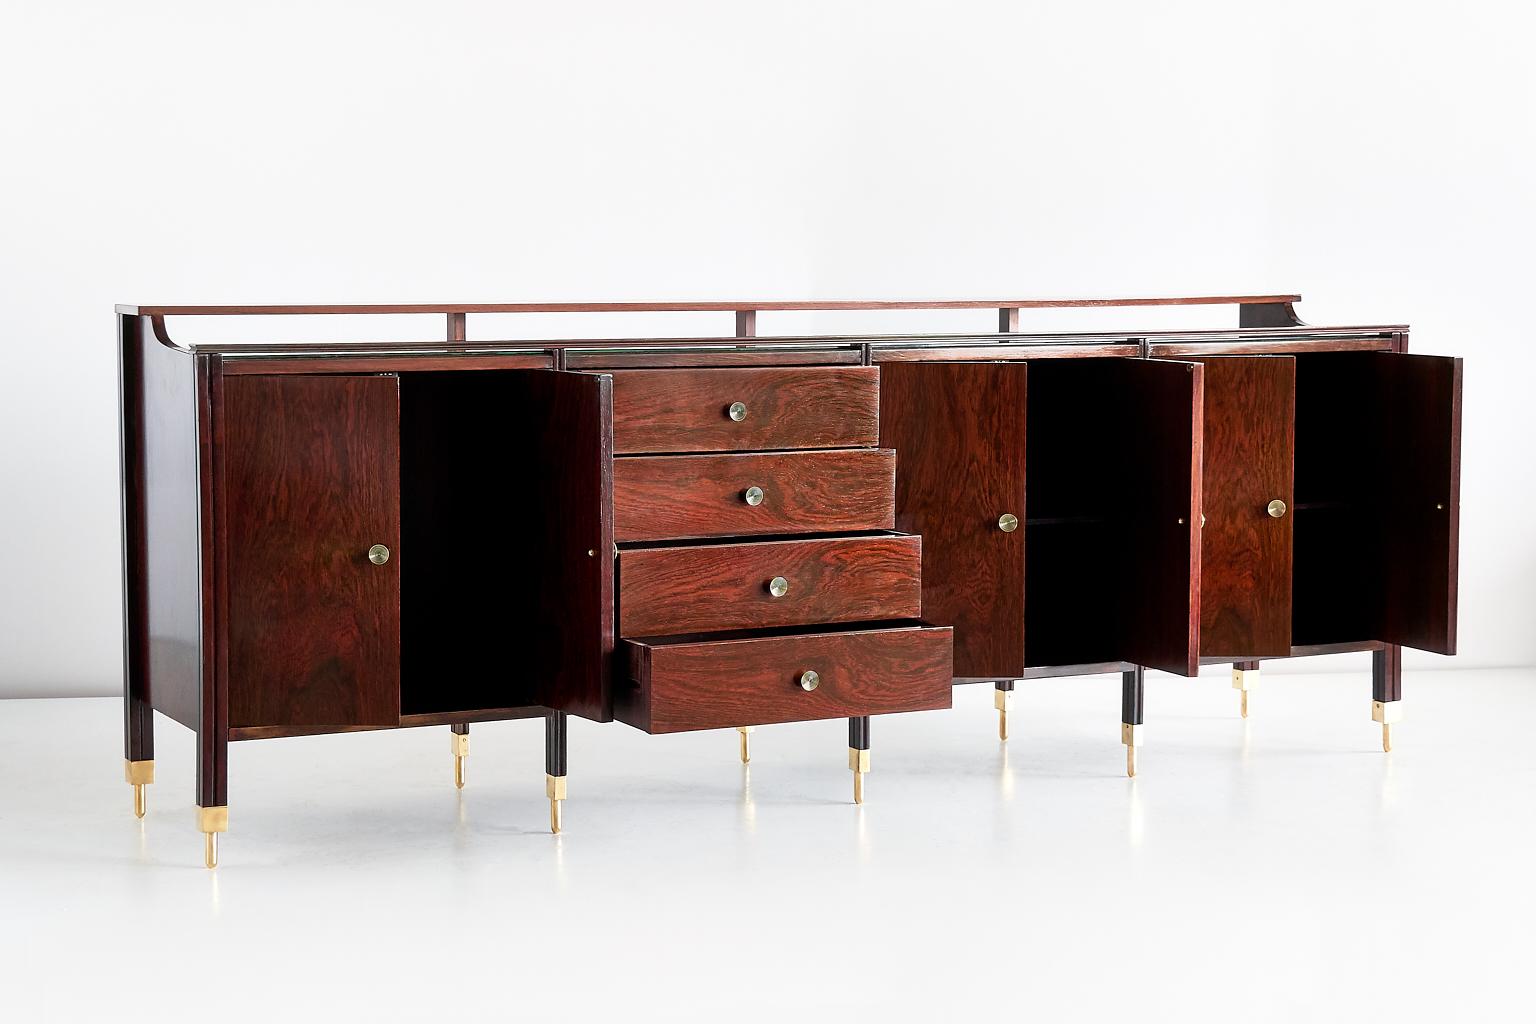 Carlo de Carli Sideboard in Rosewood and Brass for Sormani, Italy, 1964 For Sale 1